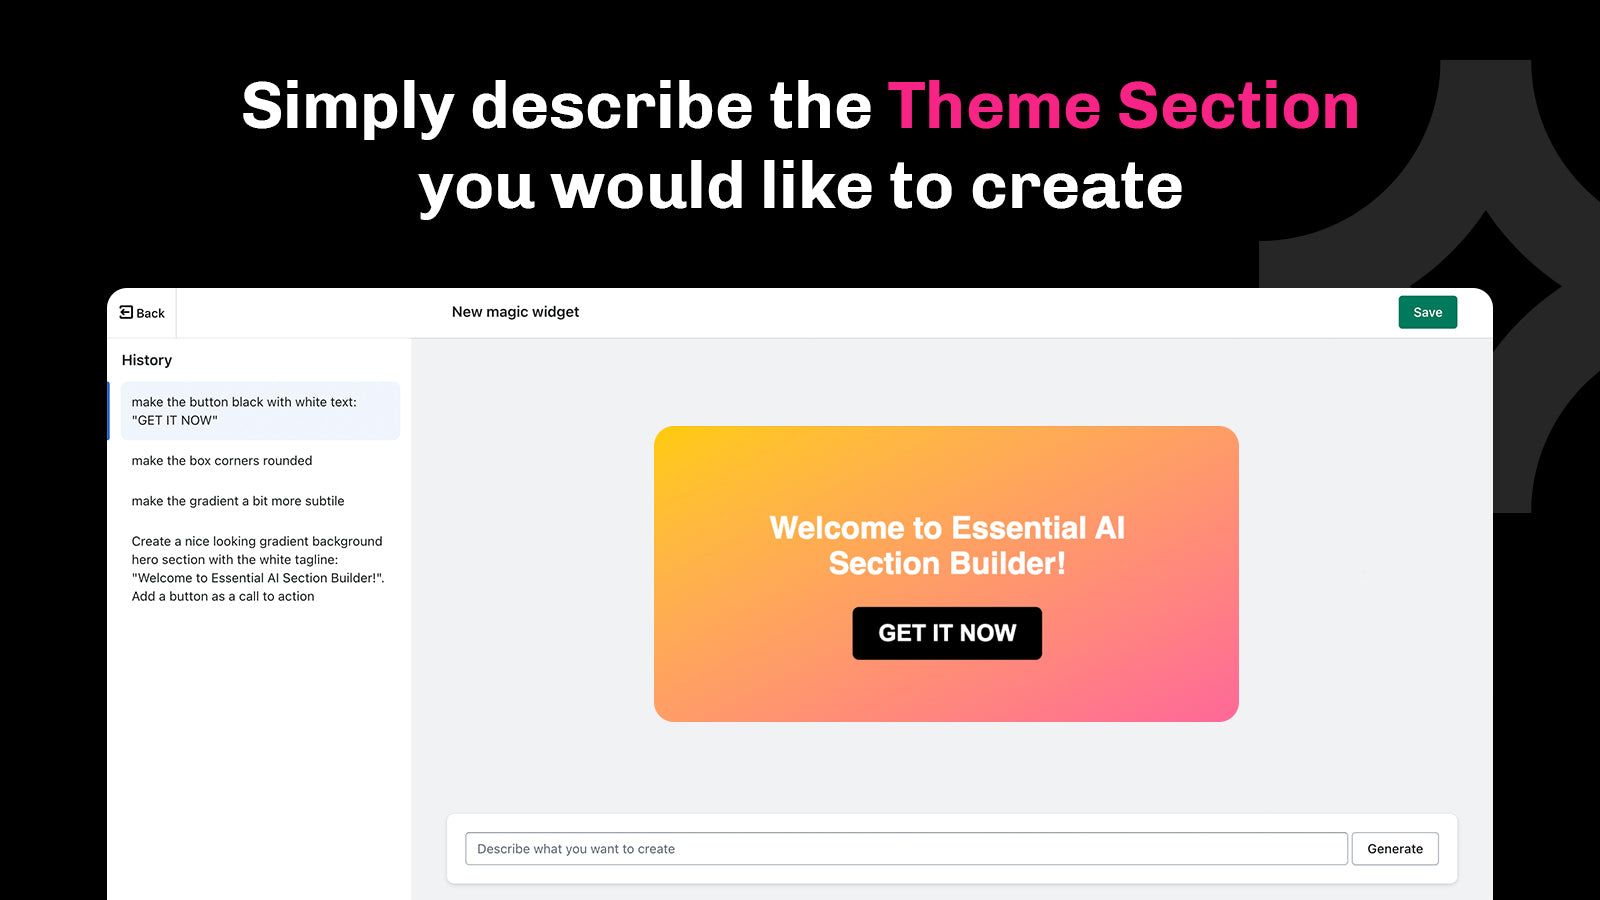 Simply describe the theme section you would like to create